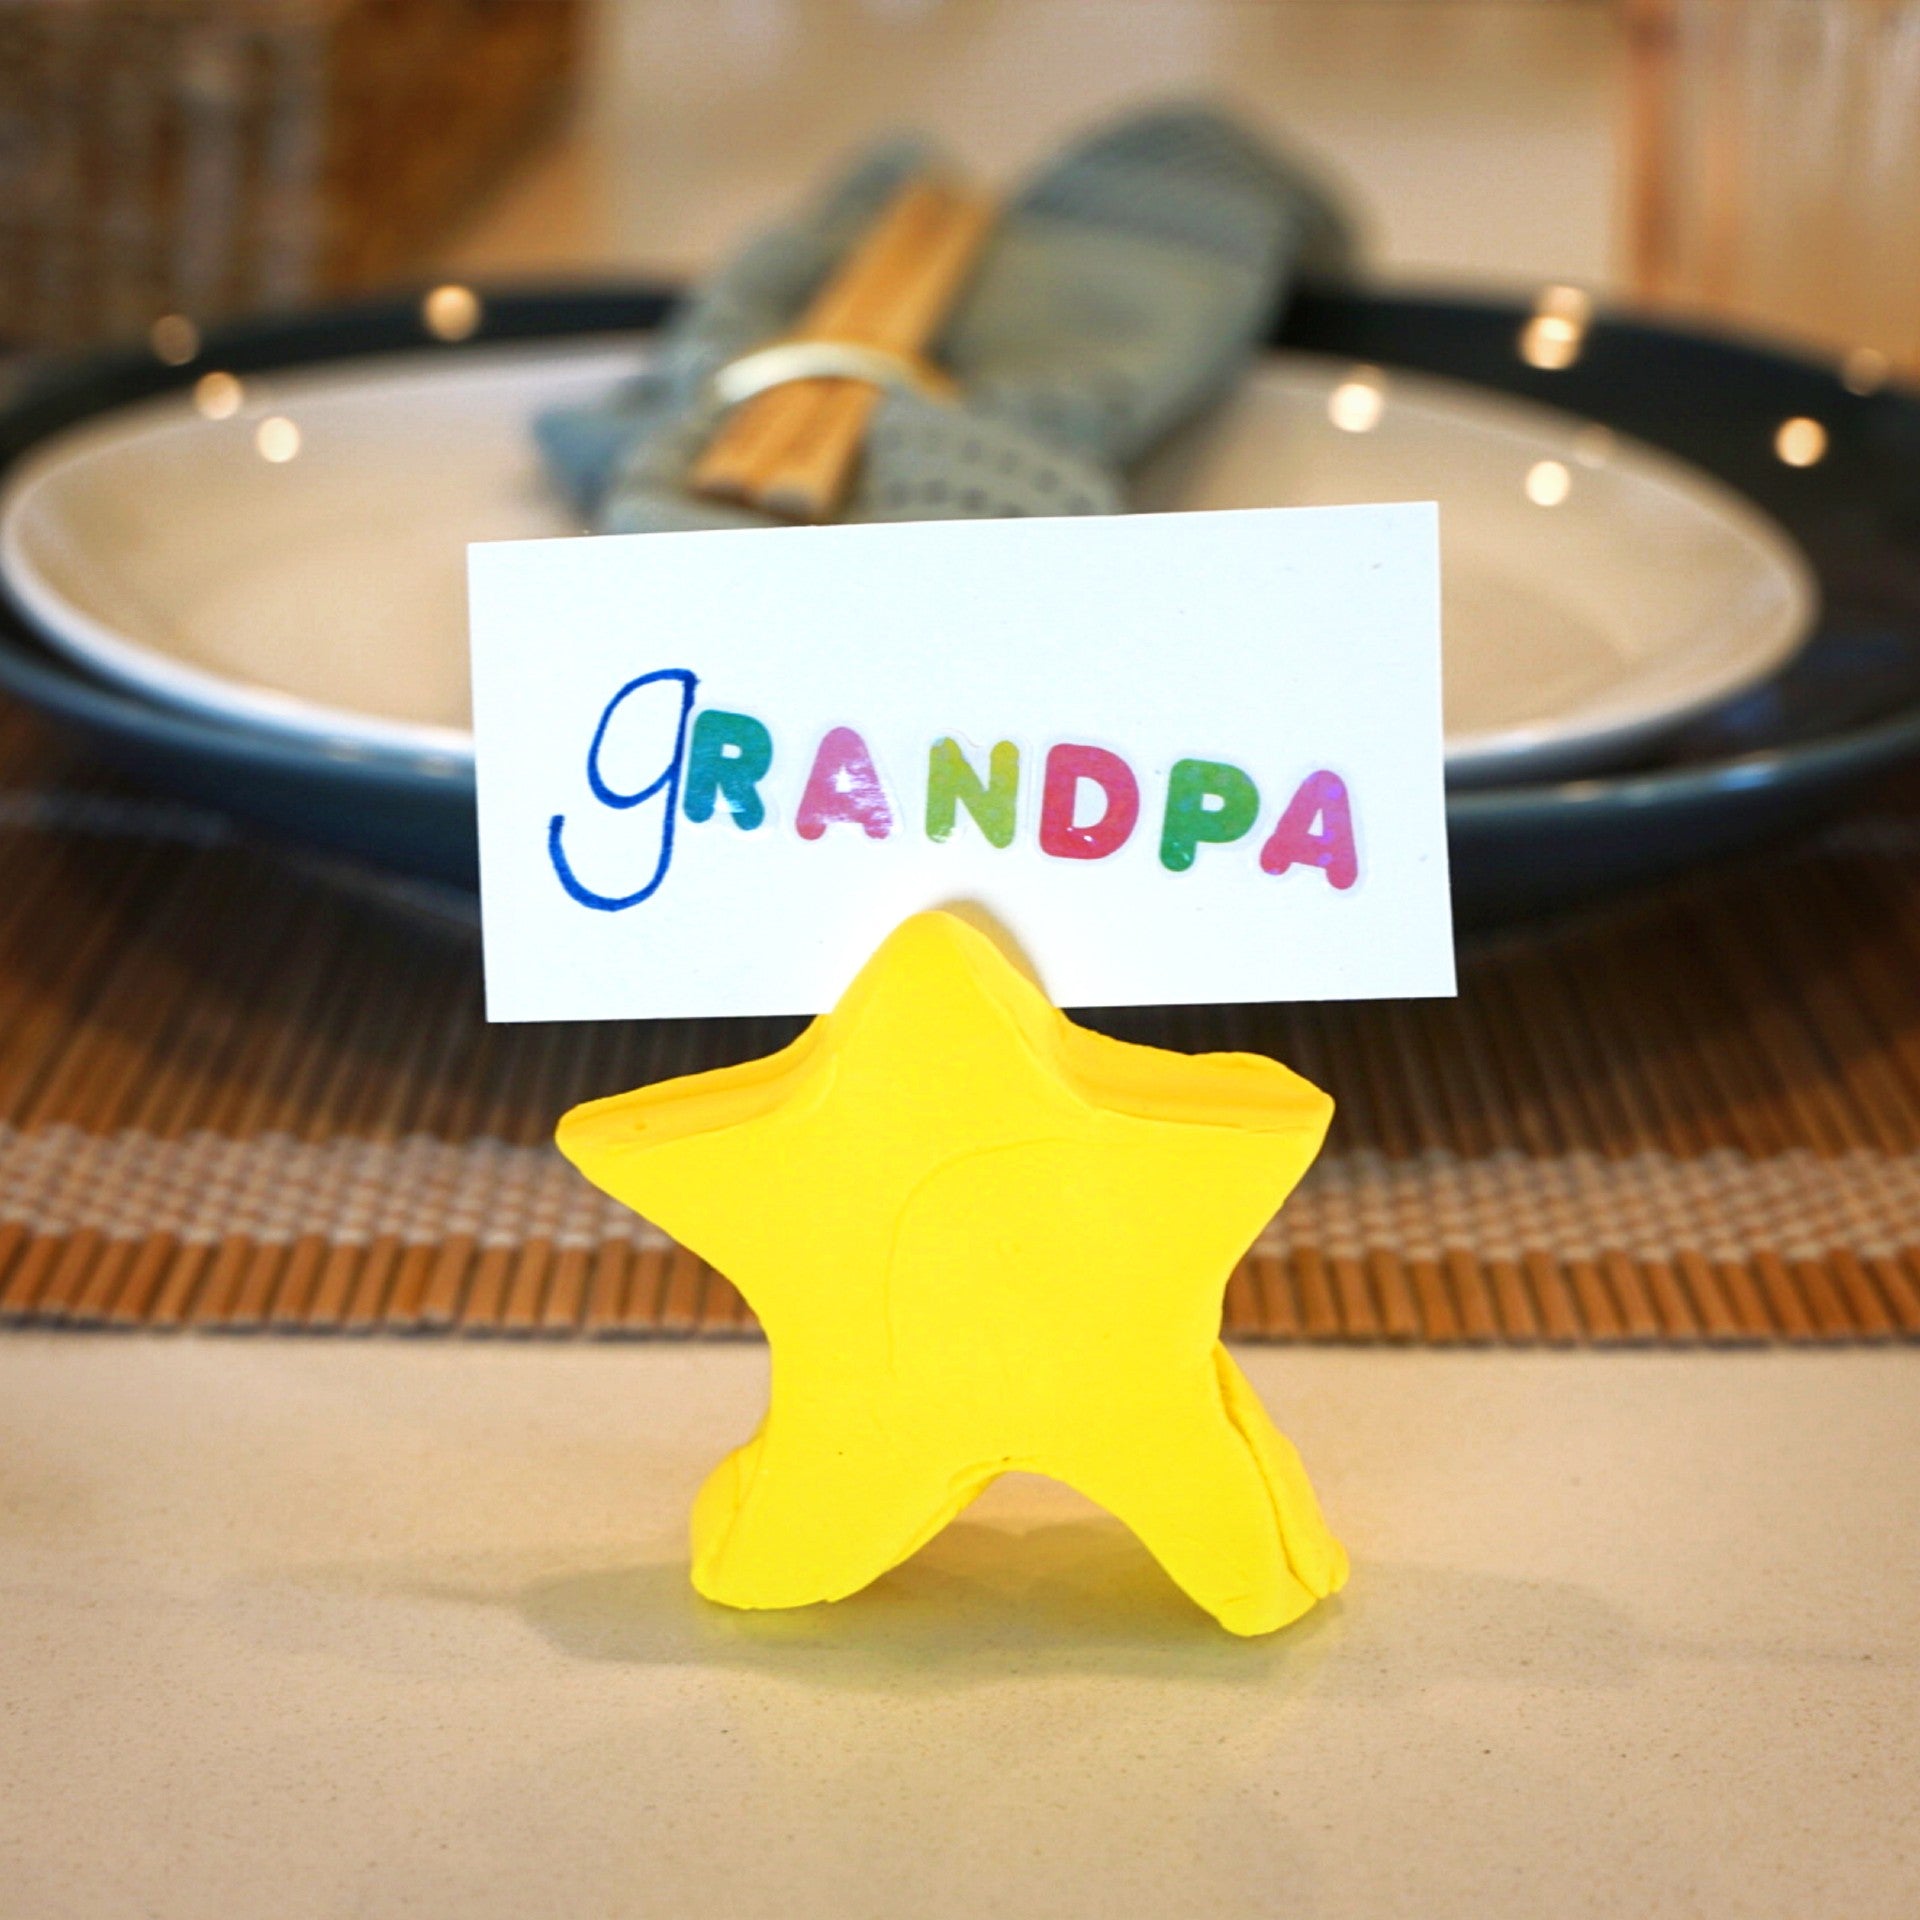 Yellow clay star holding grandpa name card in front of holiday place settings on a table